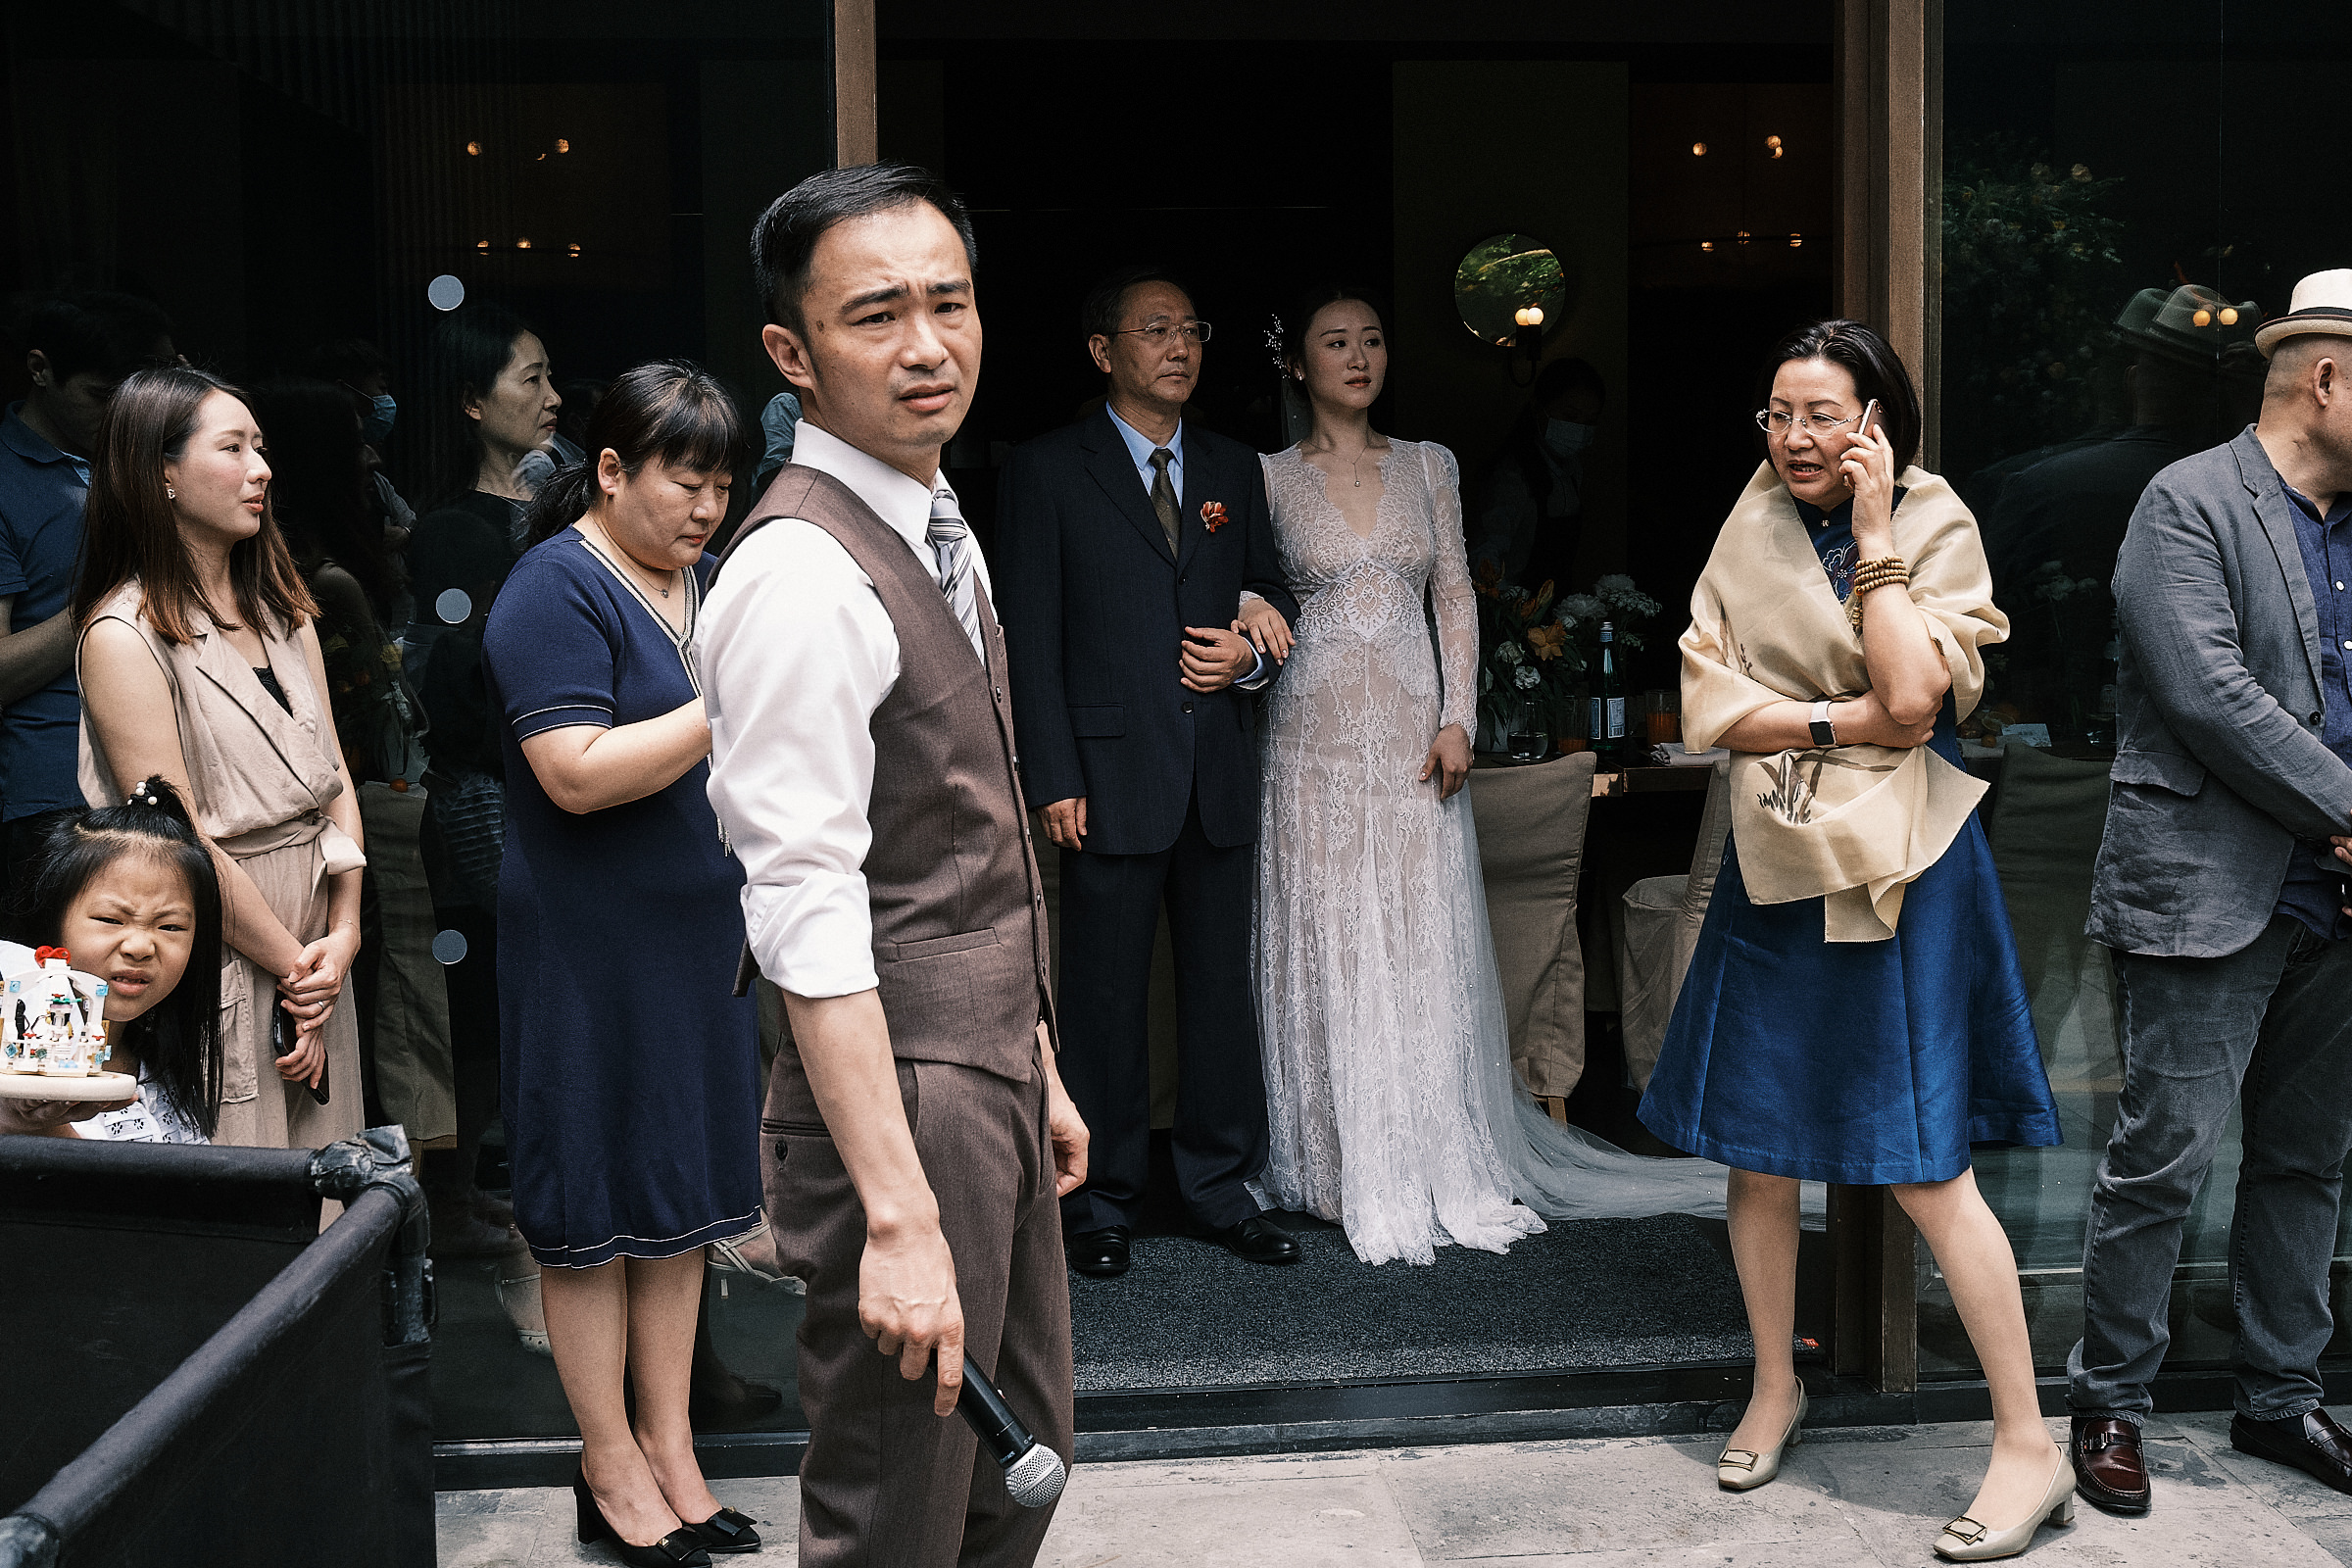 wedding guests and host surround the bride and her father as they prepare to enter the ceremony in shanghai